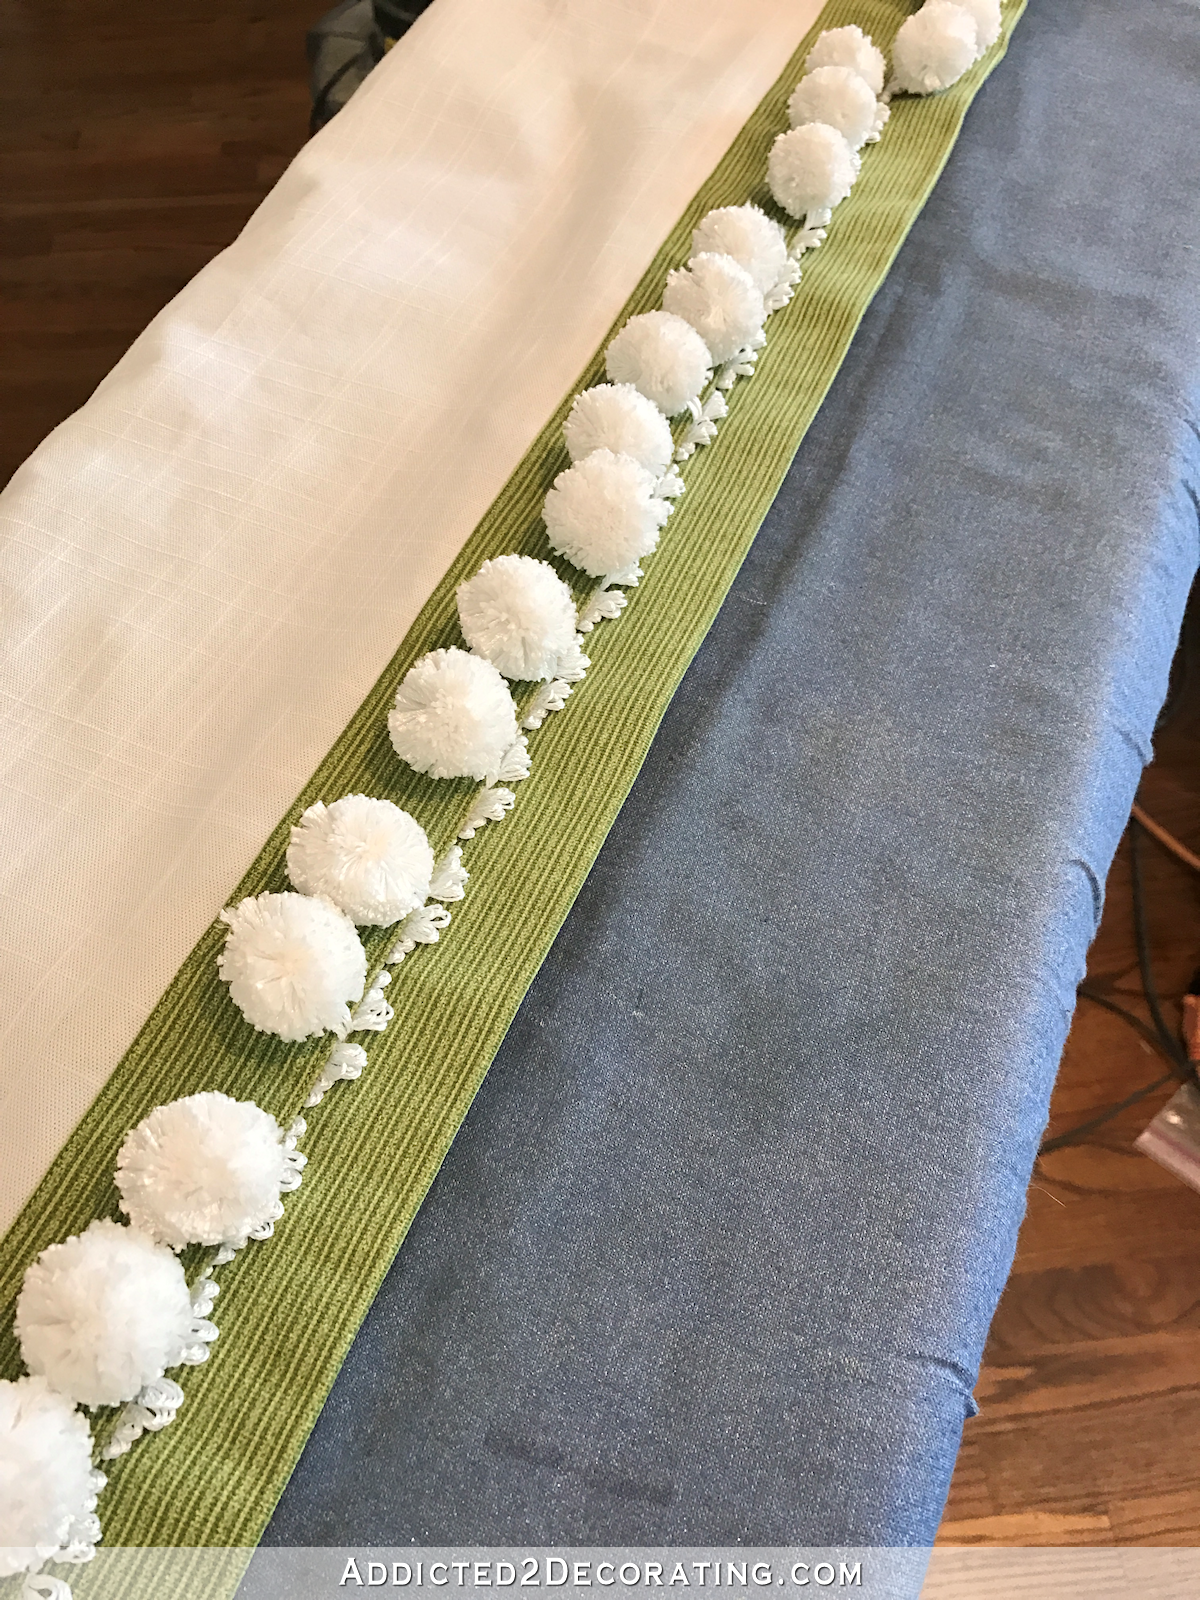 customize IKEA Ritva curtains with contras edge banding pom pom trim and pinch pleats - 15 - use steam iron to press into place and remove the pins